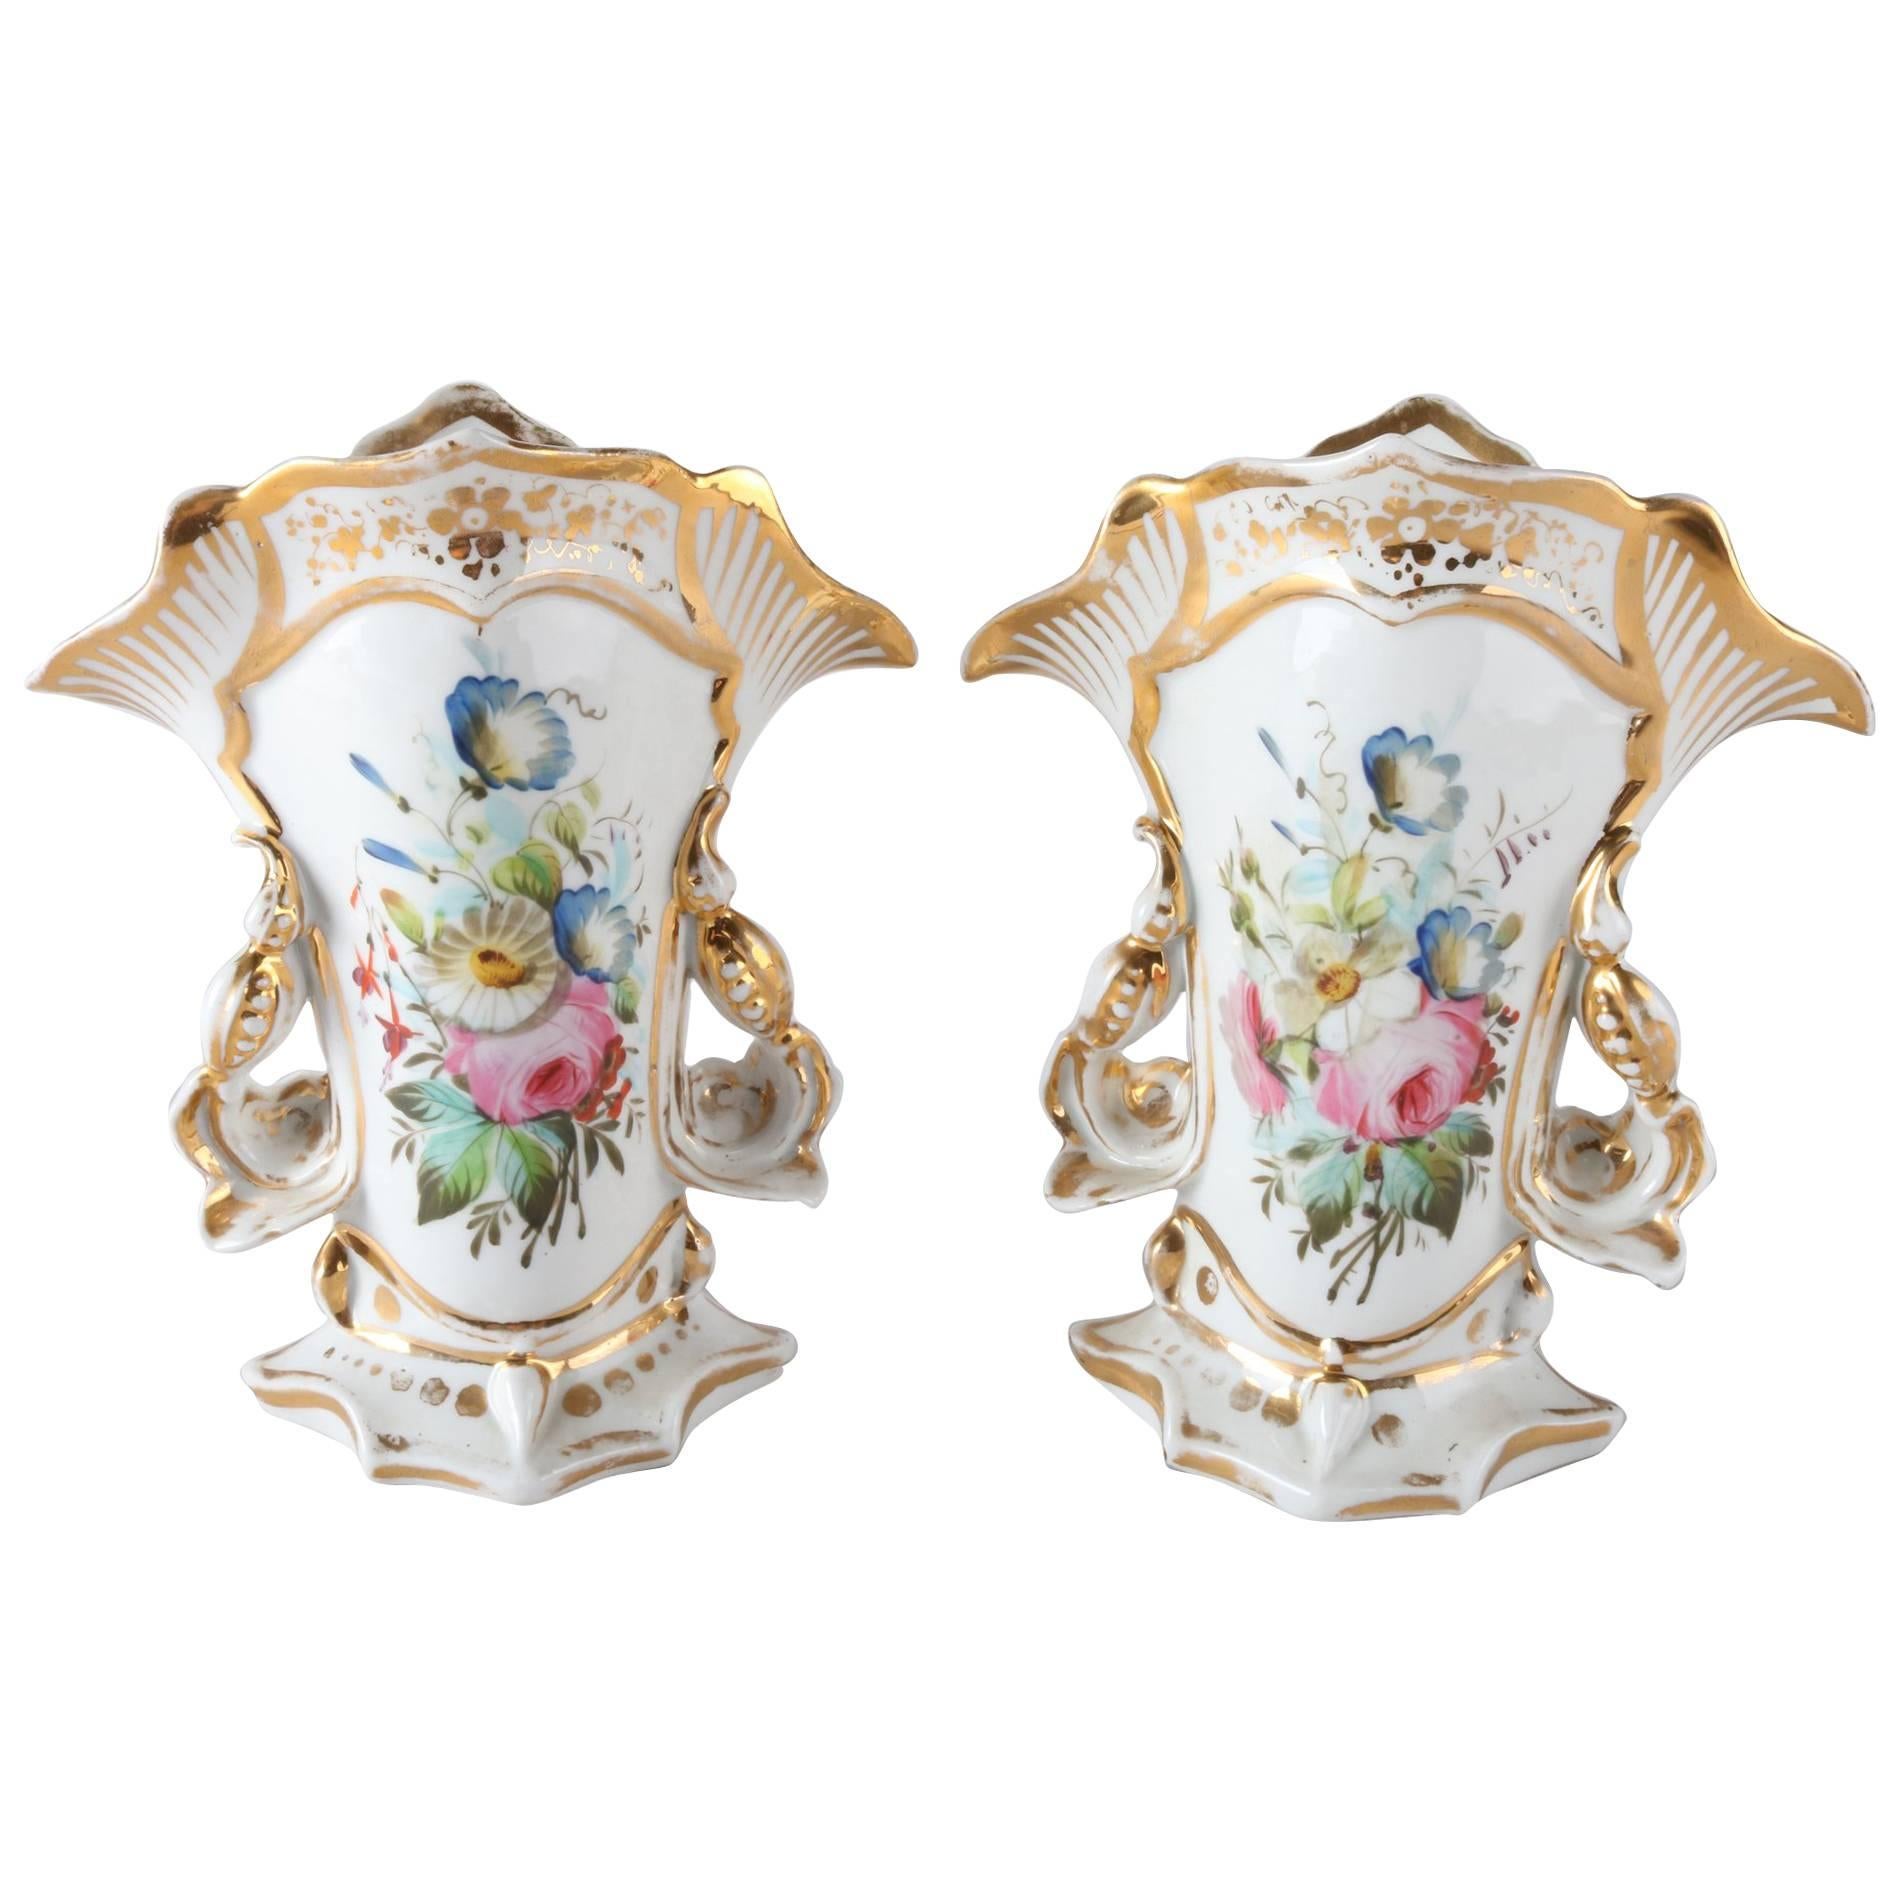 Pair of Antique French Old Paris Hand-Painted & Gilt Handled Spill Vases